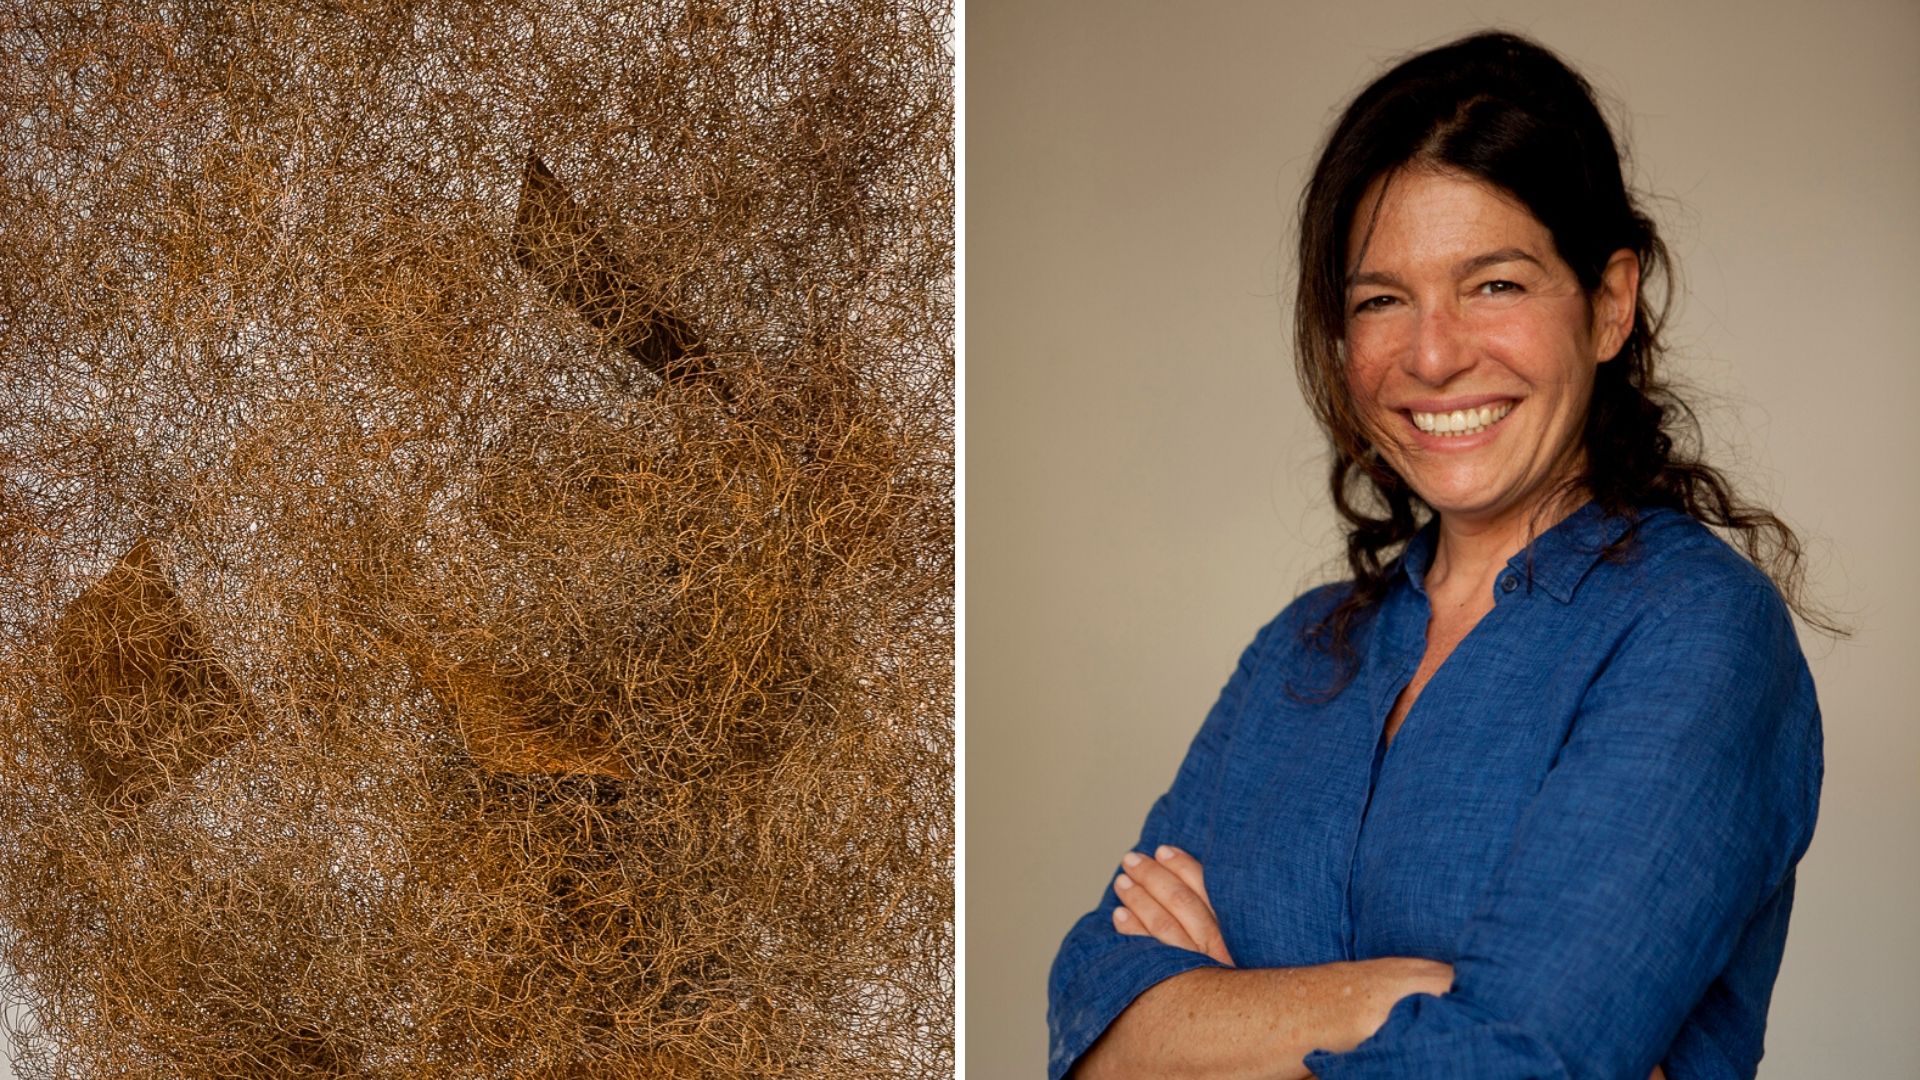 [left] image of tangle of brown fibers; [right] image portrait of woman with dark brown hair wearing blue